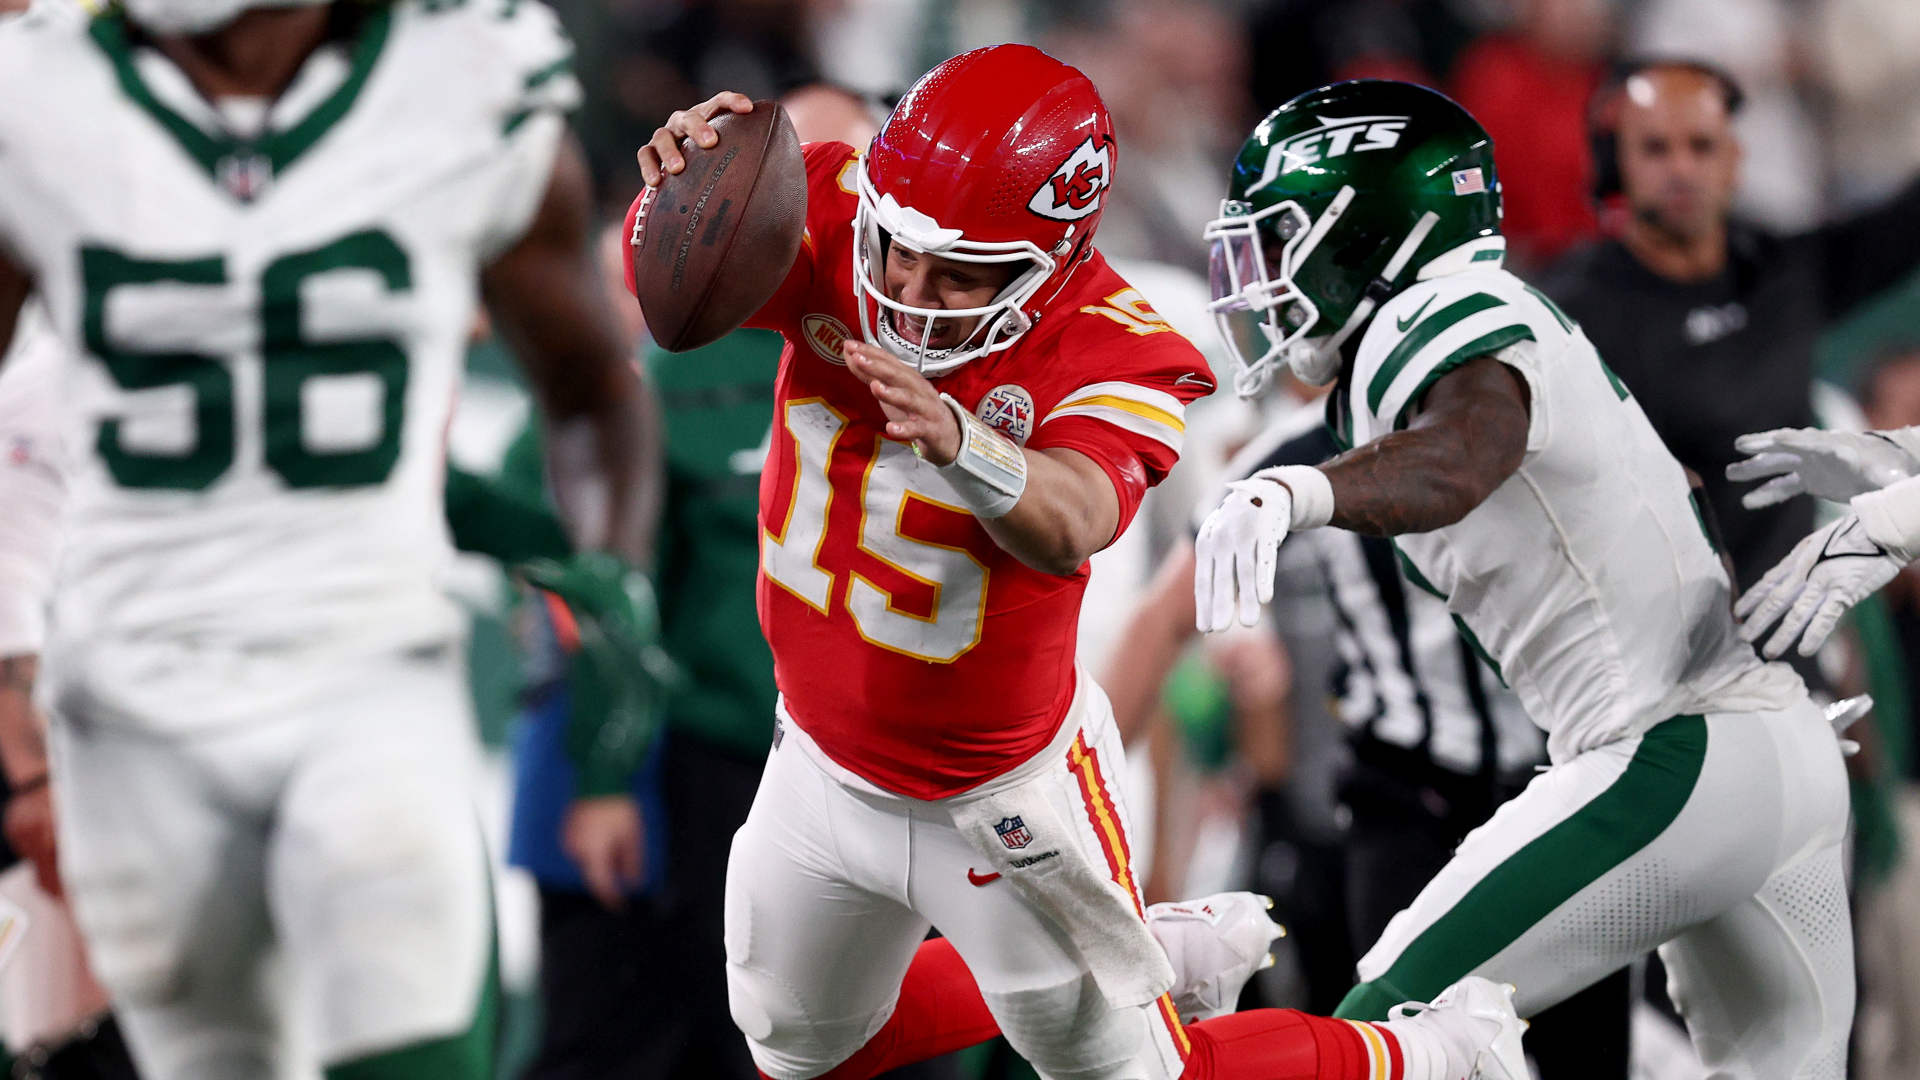 NFL wants to write Patrick Mahomes out of 2023 'script